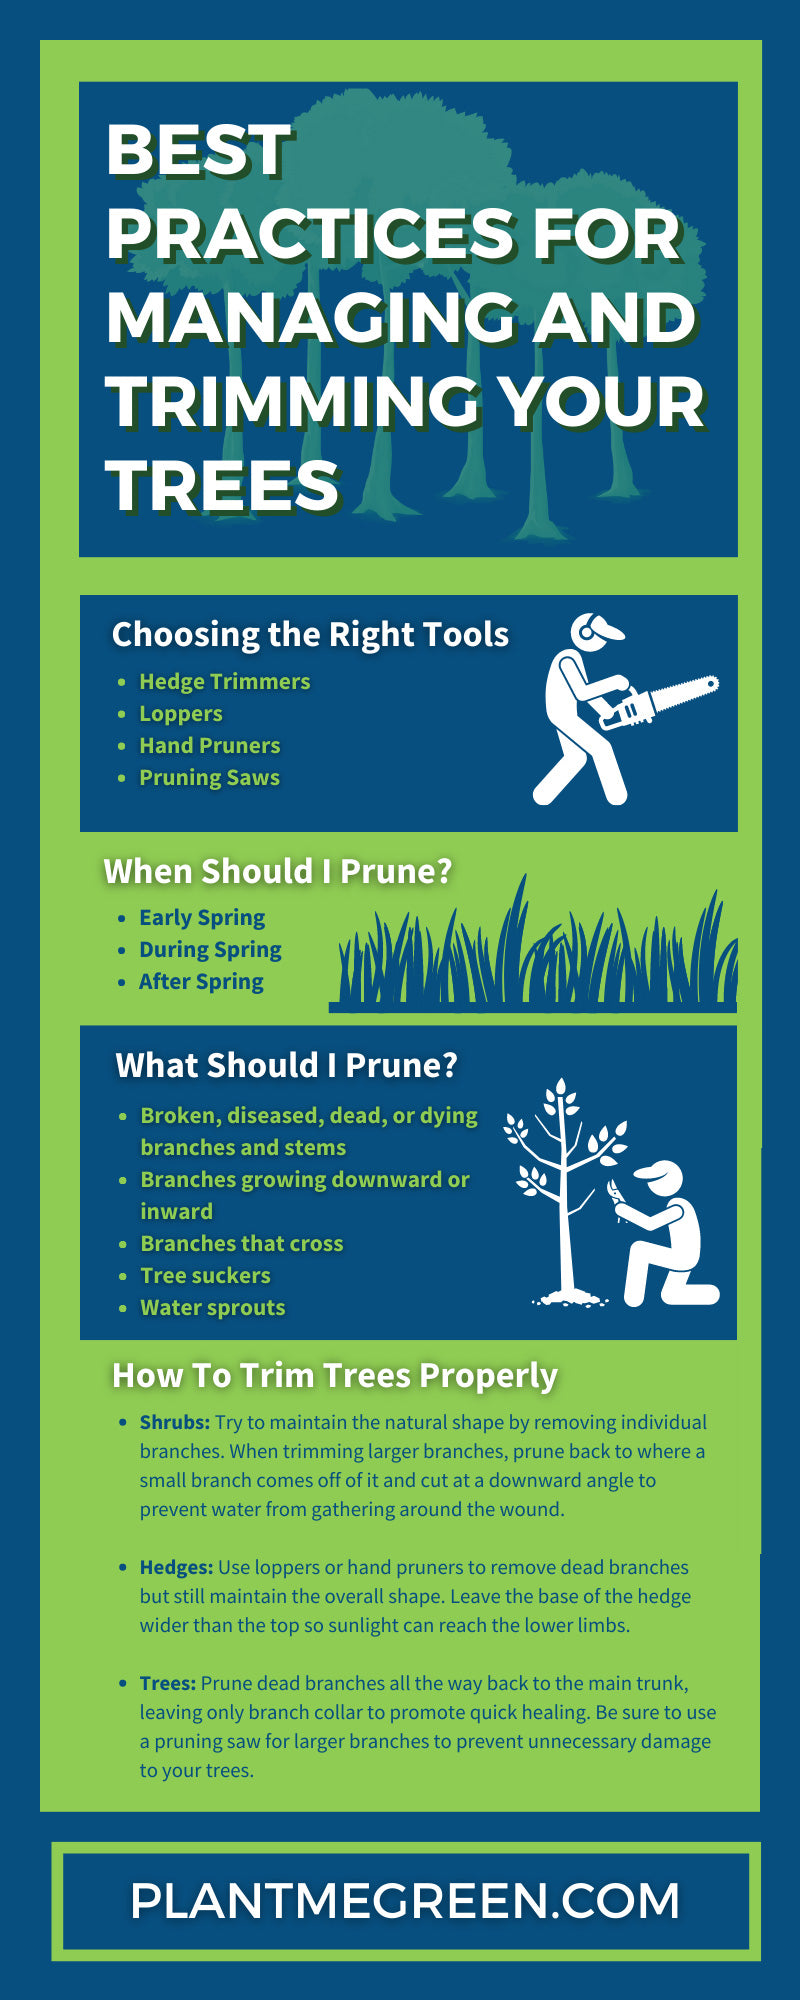 Best Practices for Managing and Trimming Your Trees